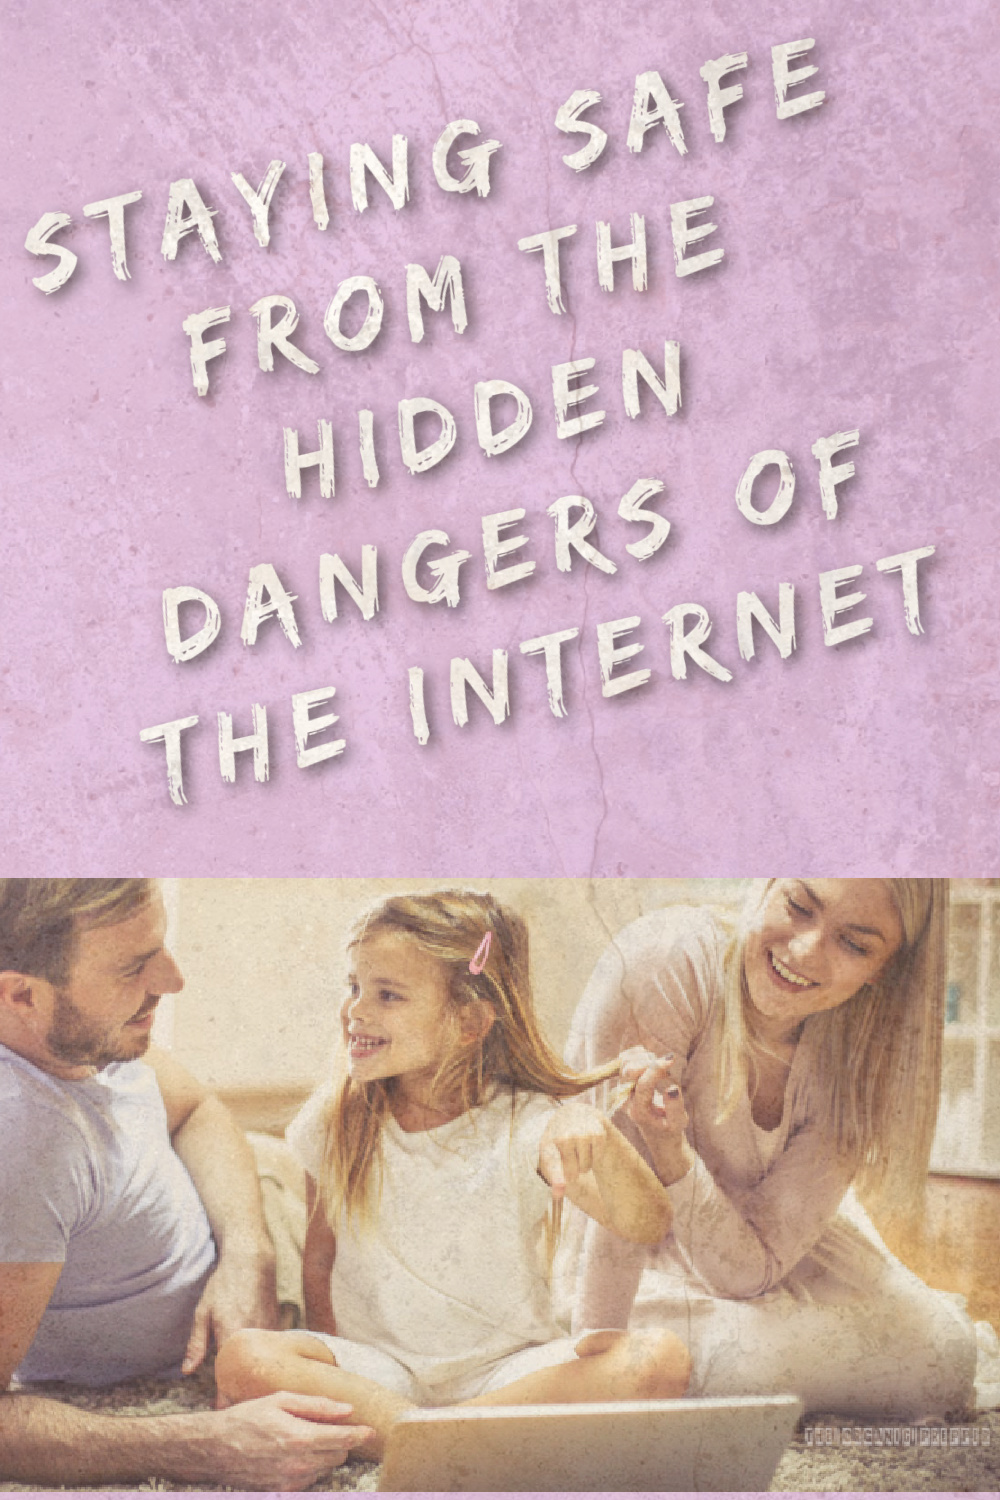 Staying Safe from the Hidden Dangers of the Internet